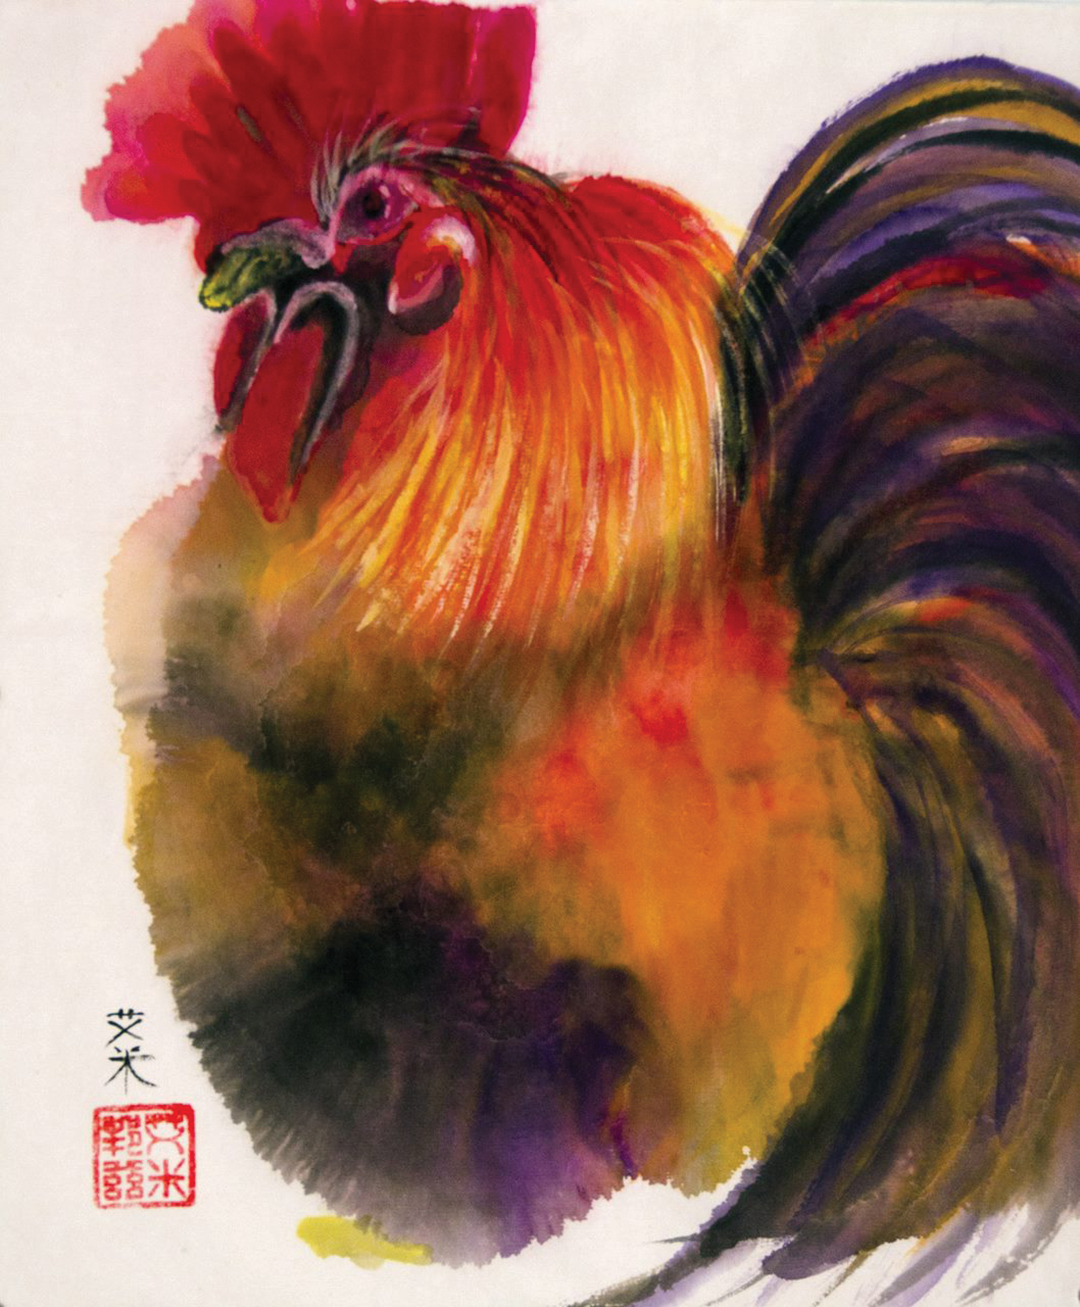 "Rooster" by Amy Bounds